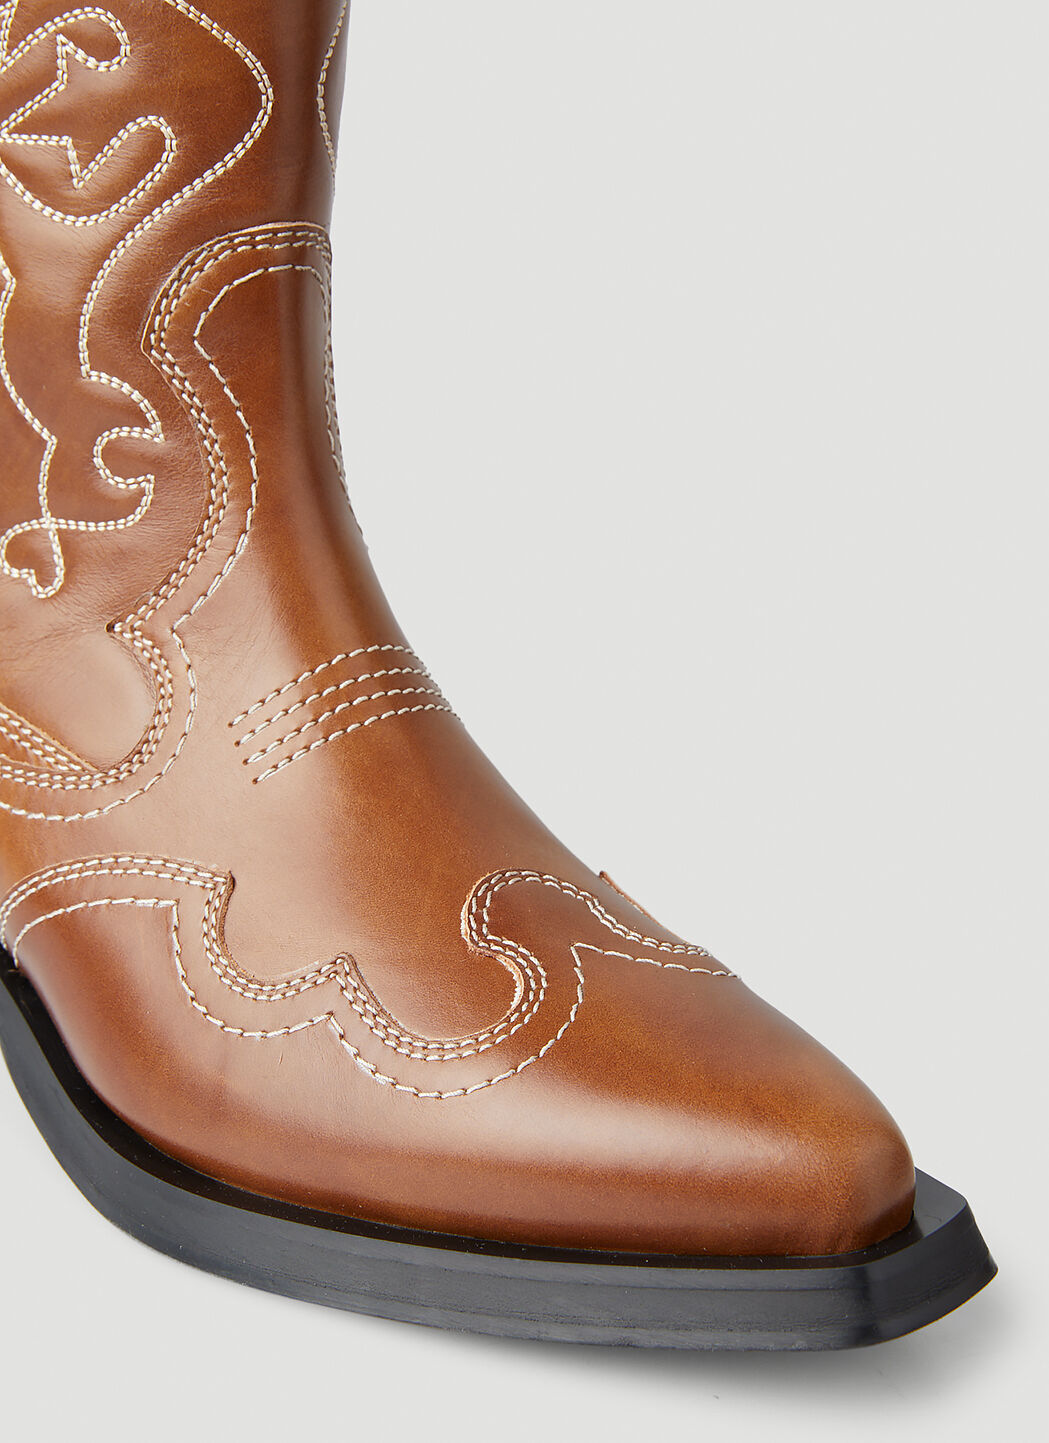 GANNI Knee High Embroidered Western Boots in Brown | LN-CC®